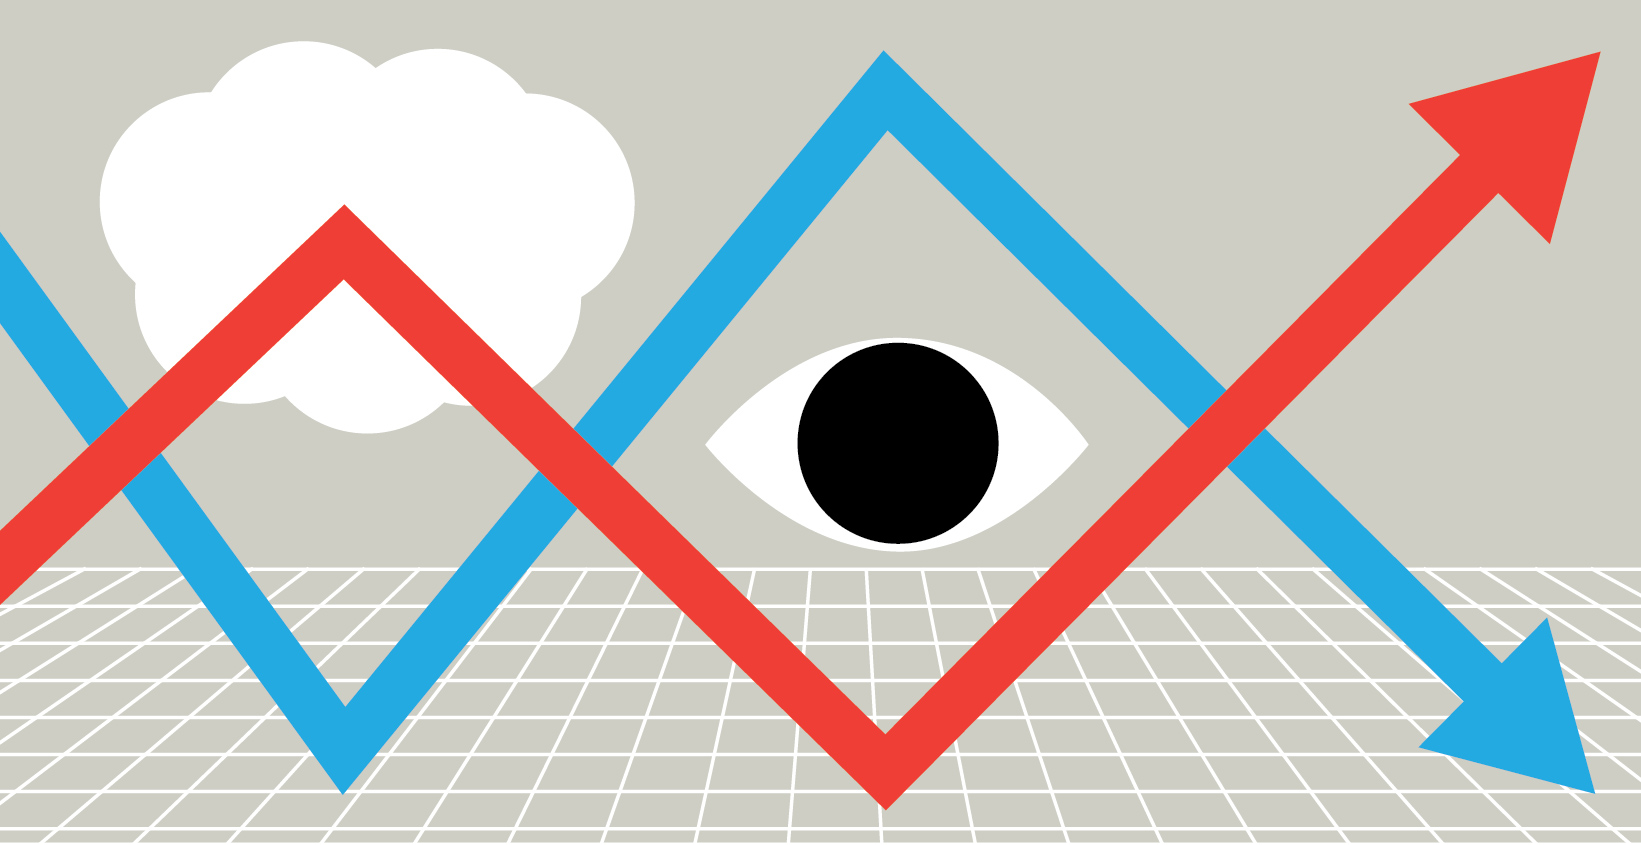 Blue and red lines depicting a graph with an eye in the center on a gray background